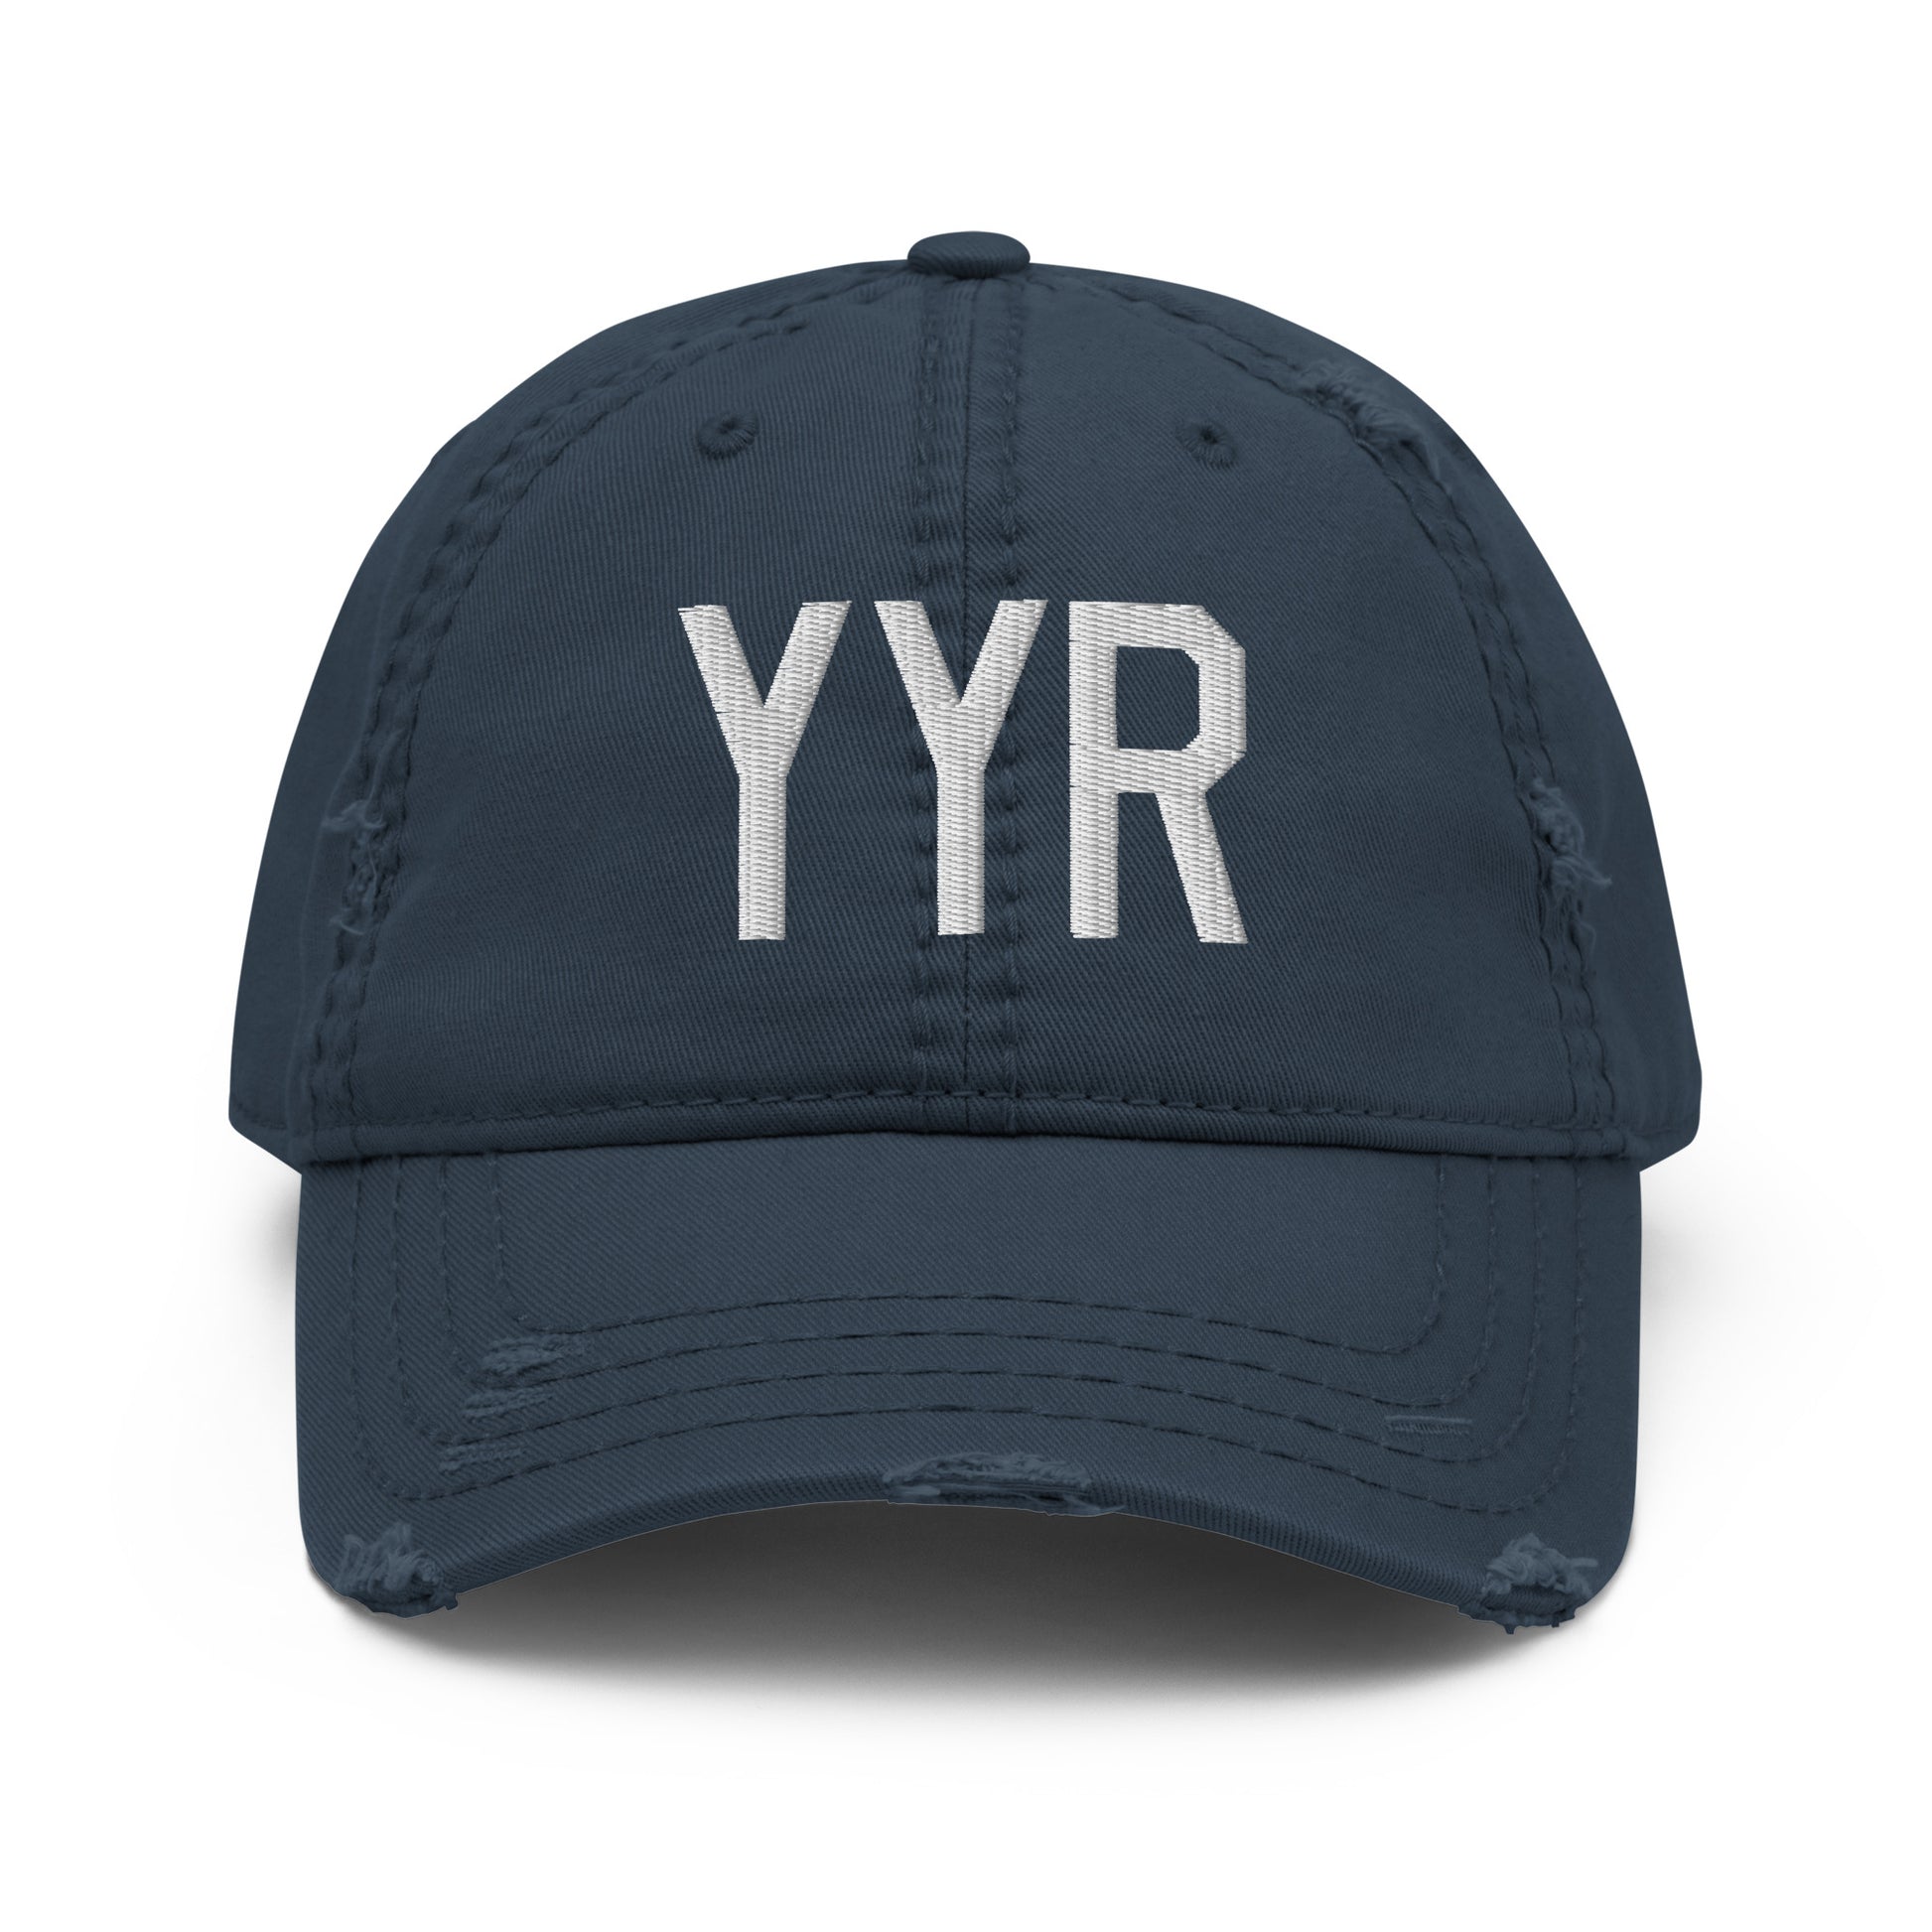 Airport Code Distressed Hat - White • YYR Goose Bay • YHM Designs - Image 13